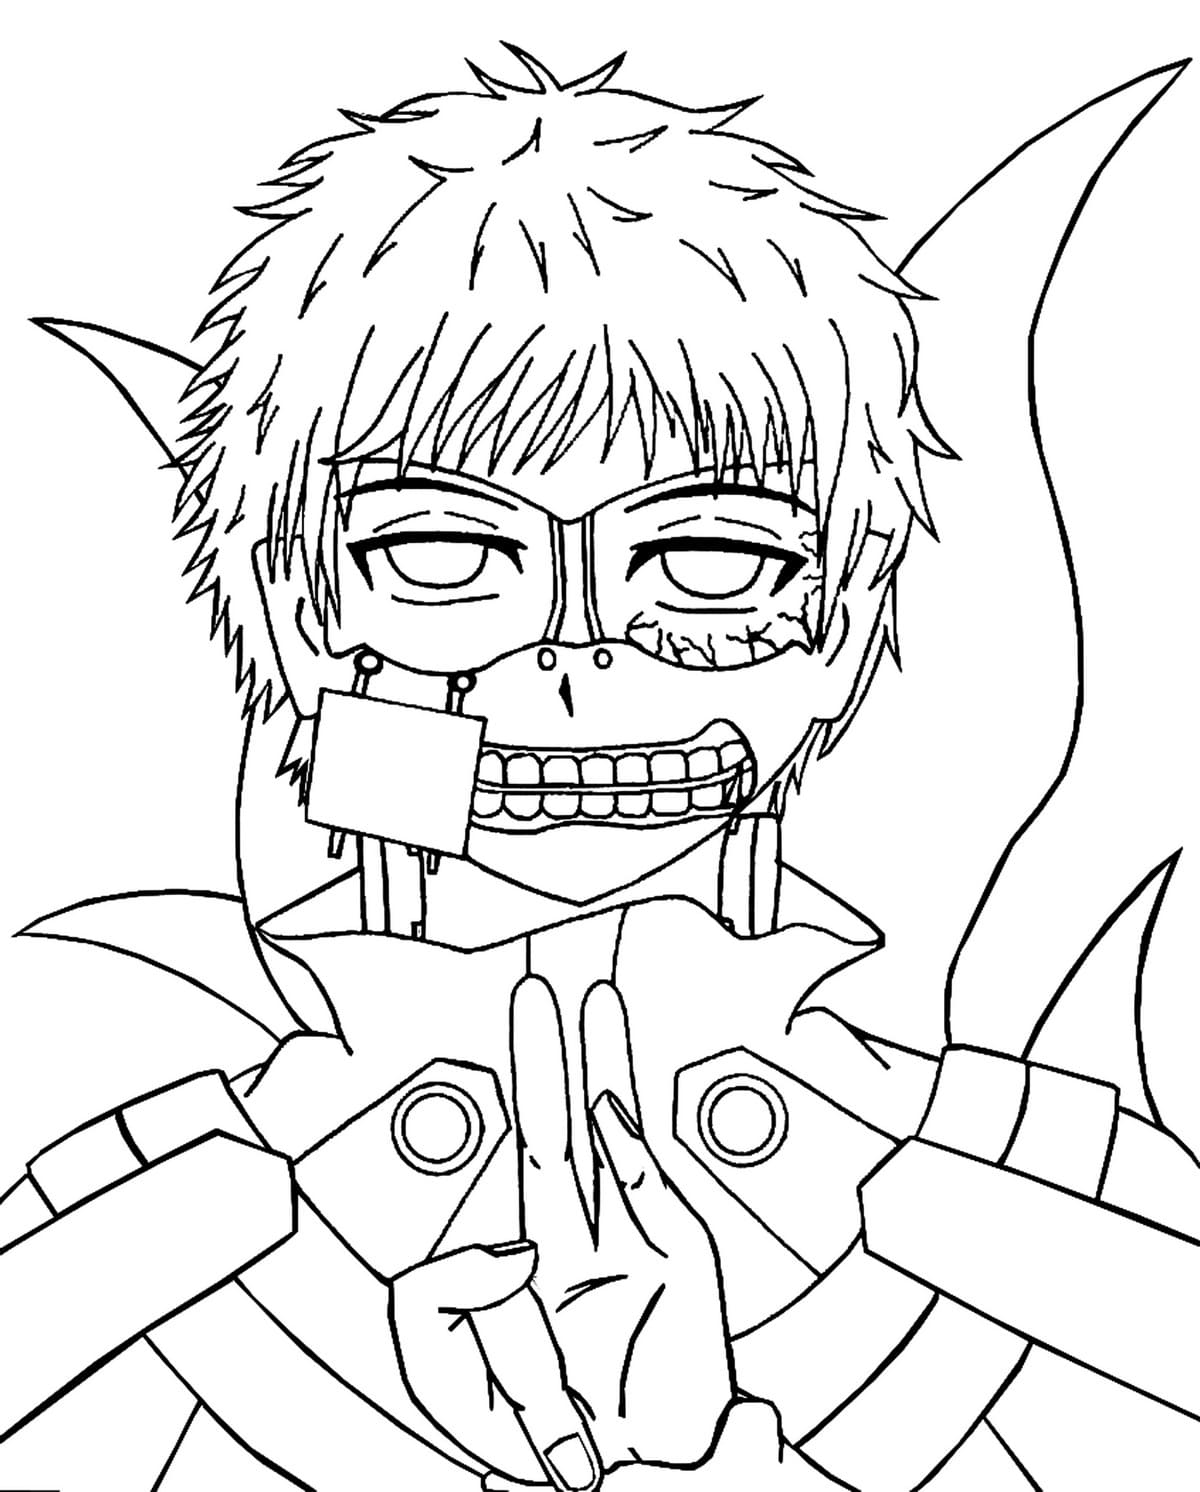 Tokyo Ghoul Coloring Pages - Print and Color | WONDER DAY — Coloring pages  for children and adults